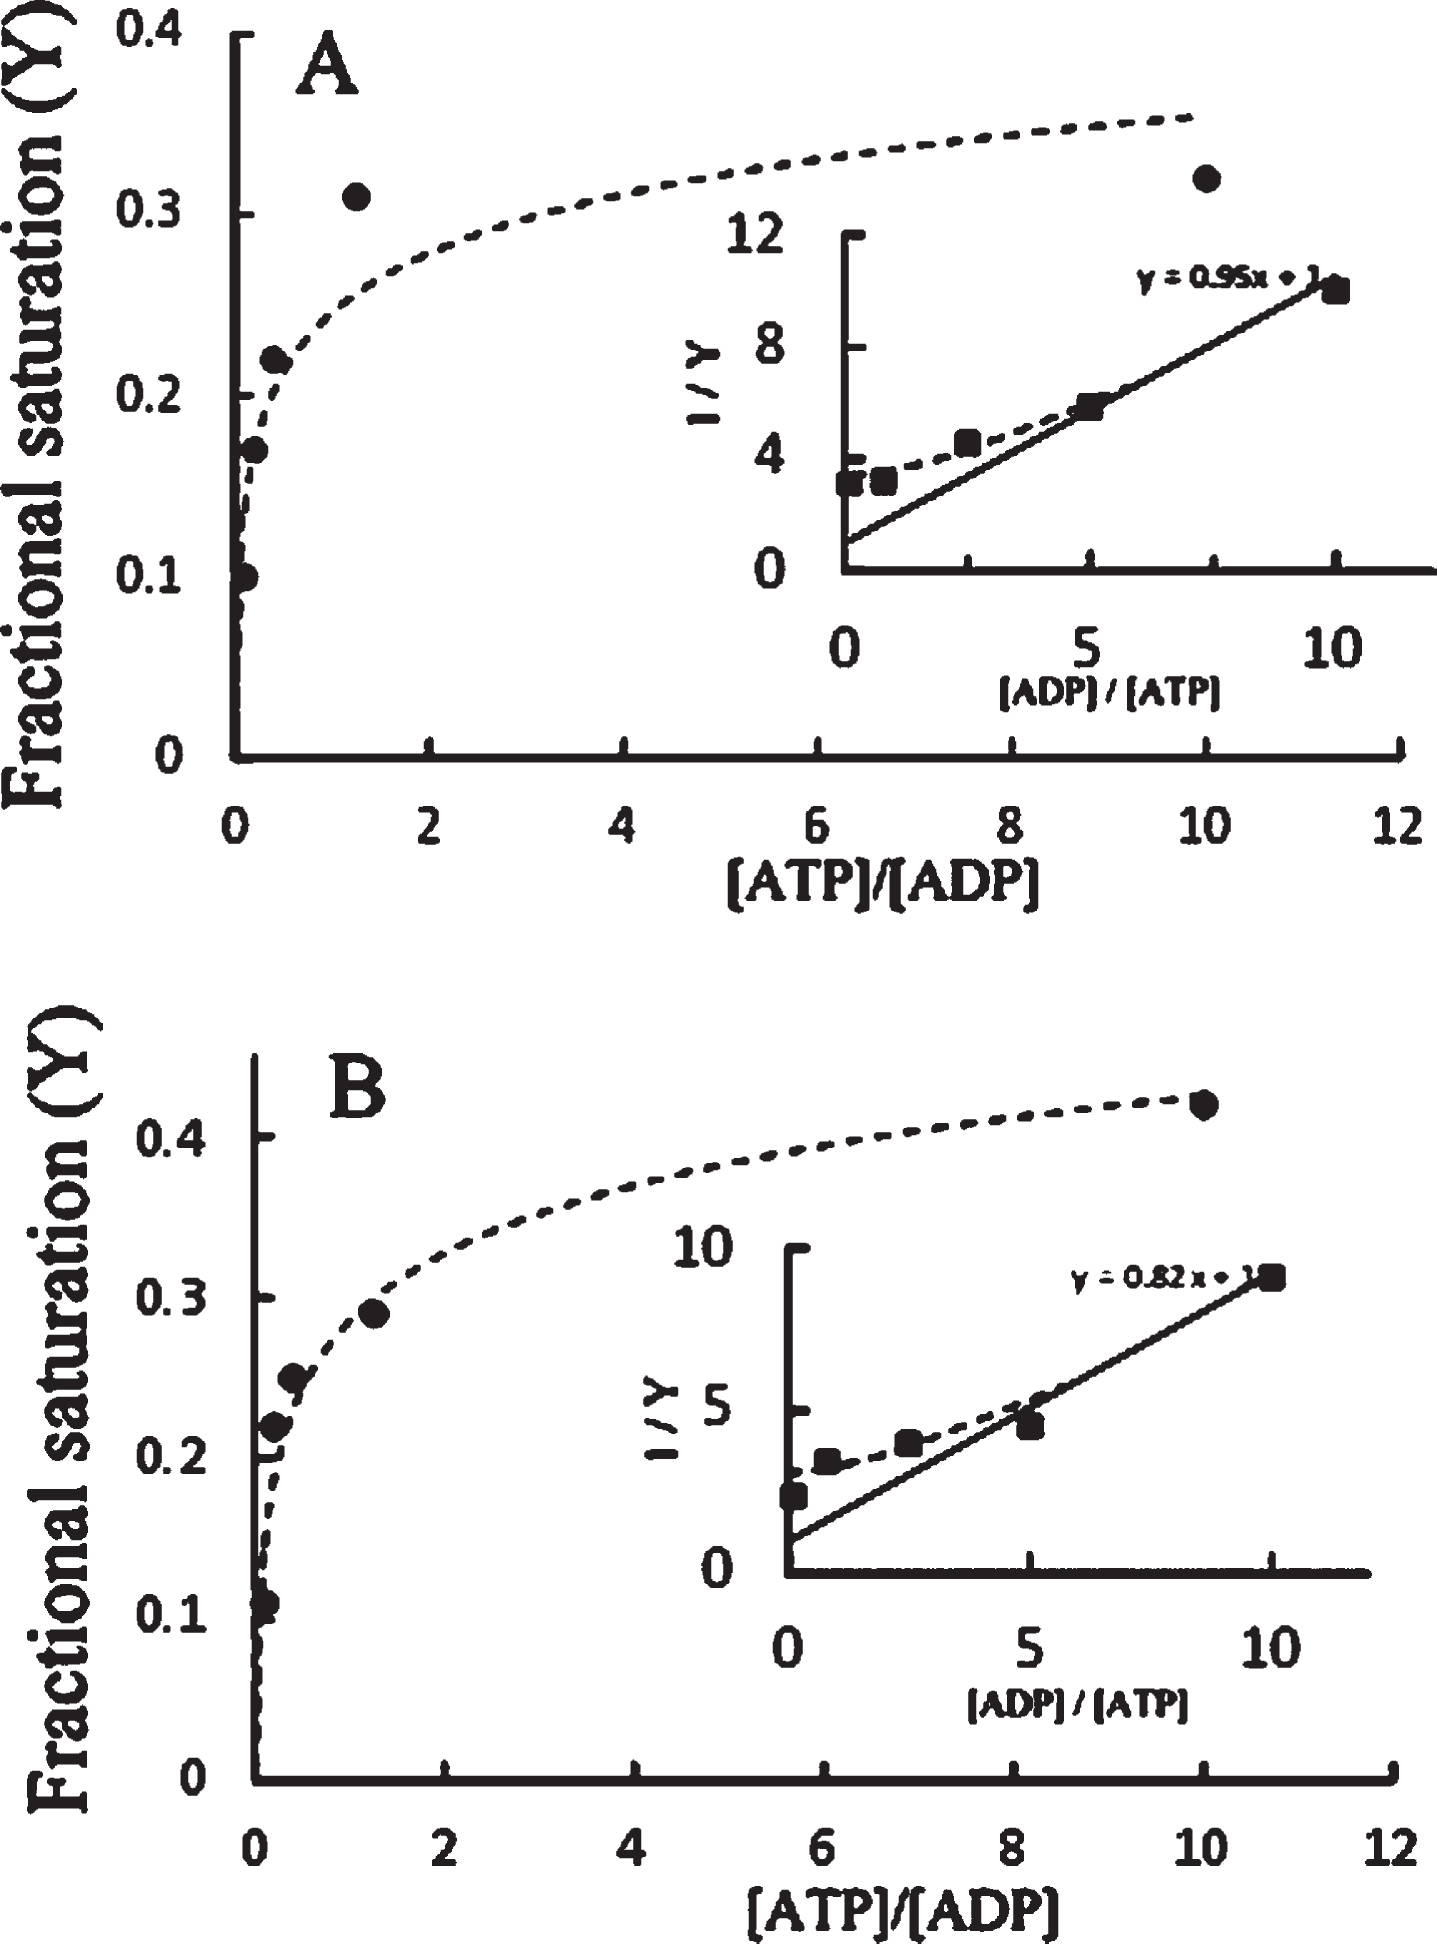 Fractional saturation of phosphorylation sites on tau, following the data of Table 1. The fractional saturation as a function of the [ATP]/[ADP] ratio, keeping [ATP] constant at 0.1 mM (part A) or 0.87 mM (part B). The insets show the inverse plots corresponding to equation (5).